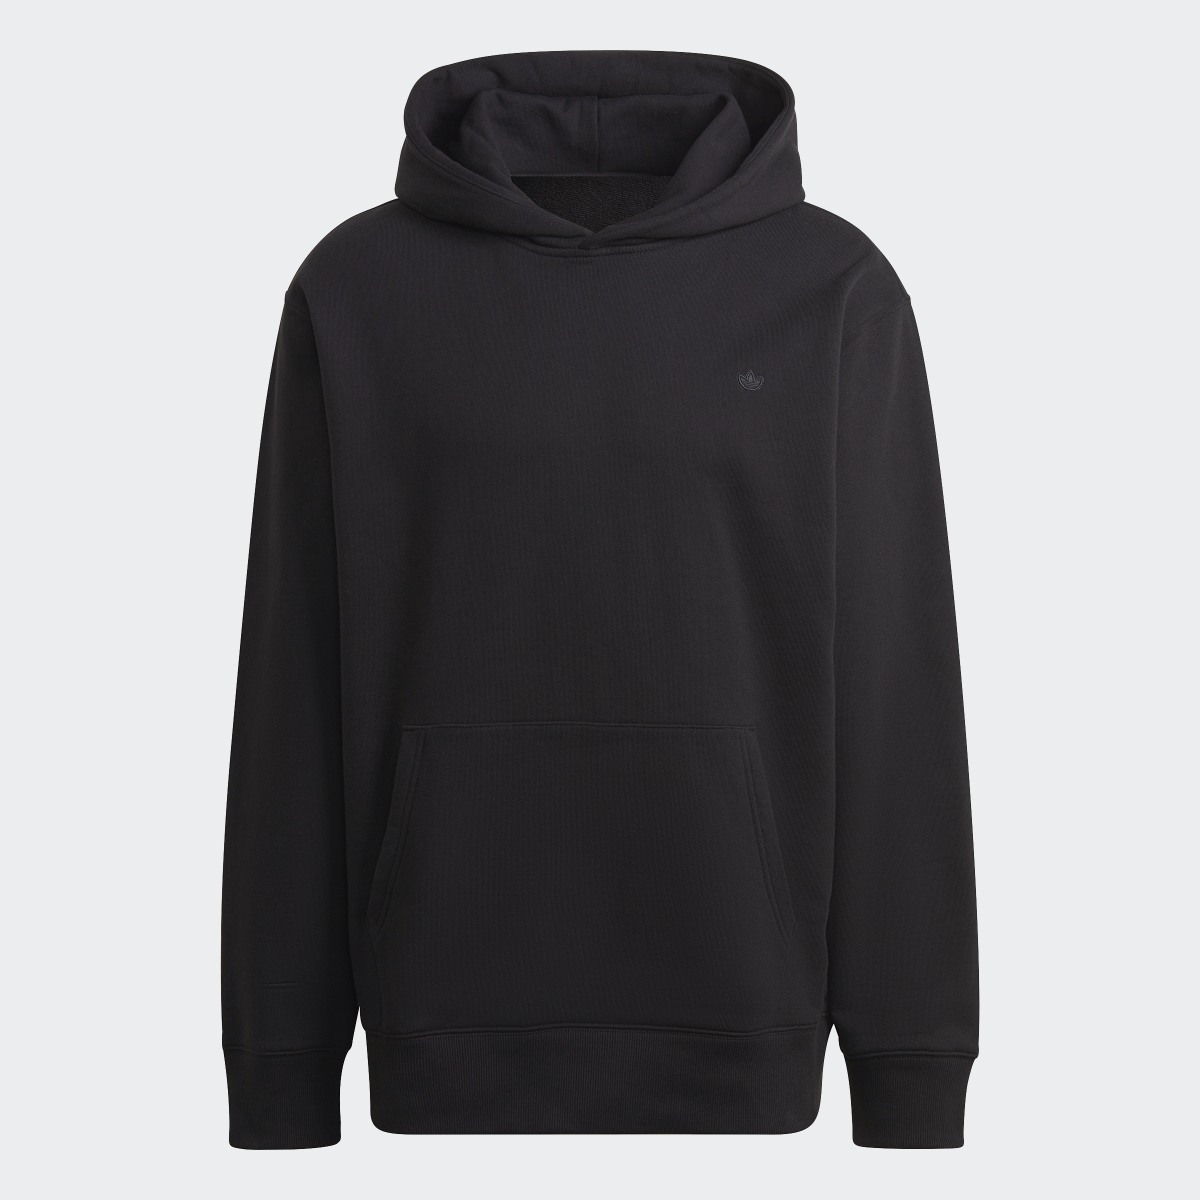 Adidas Adicolor Contempo French Terry Hoodie. 5